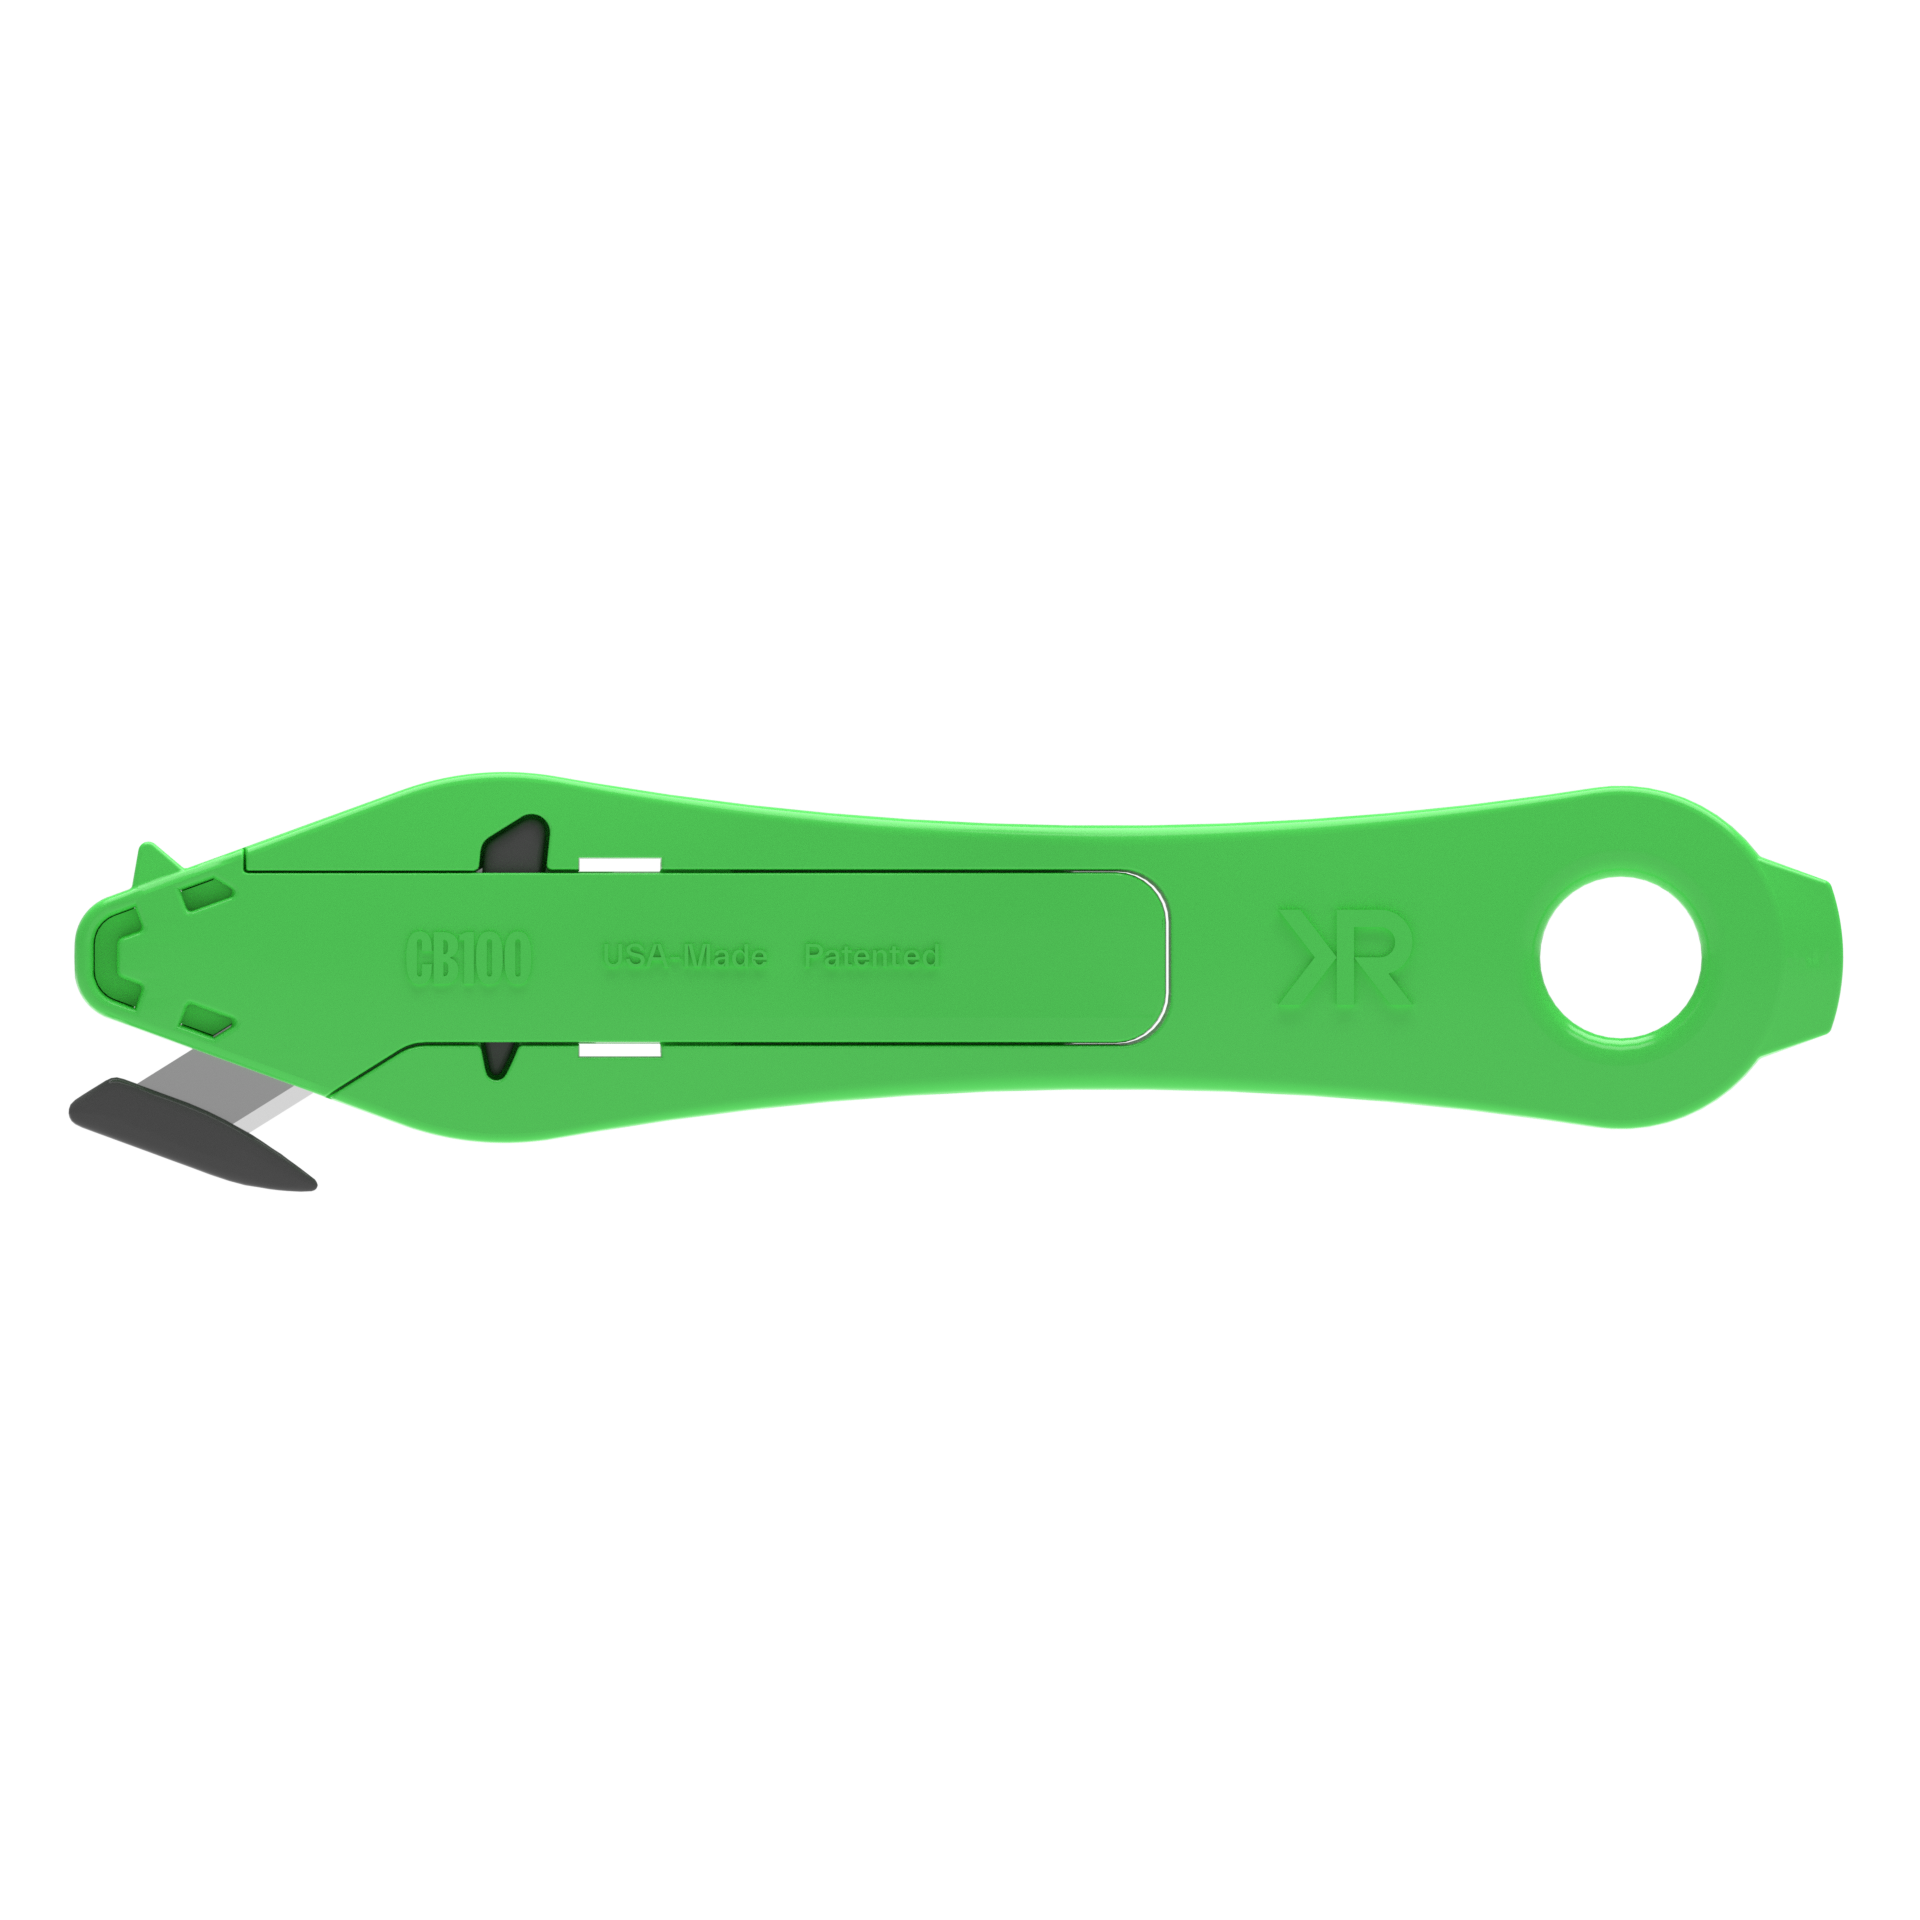 Riteknife AS100 Auto Retractable Safety Knife